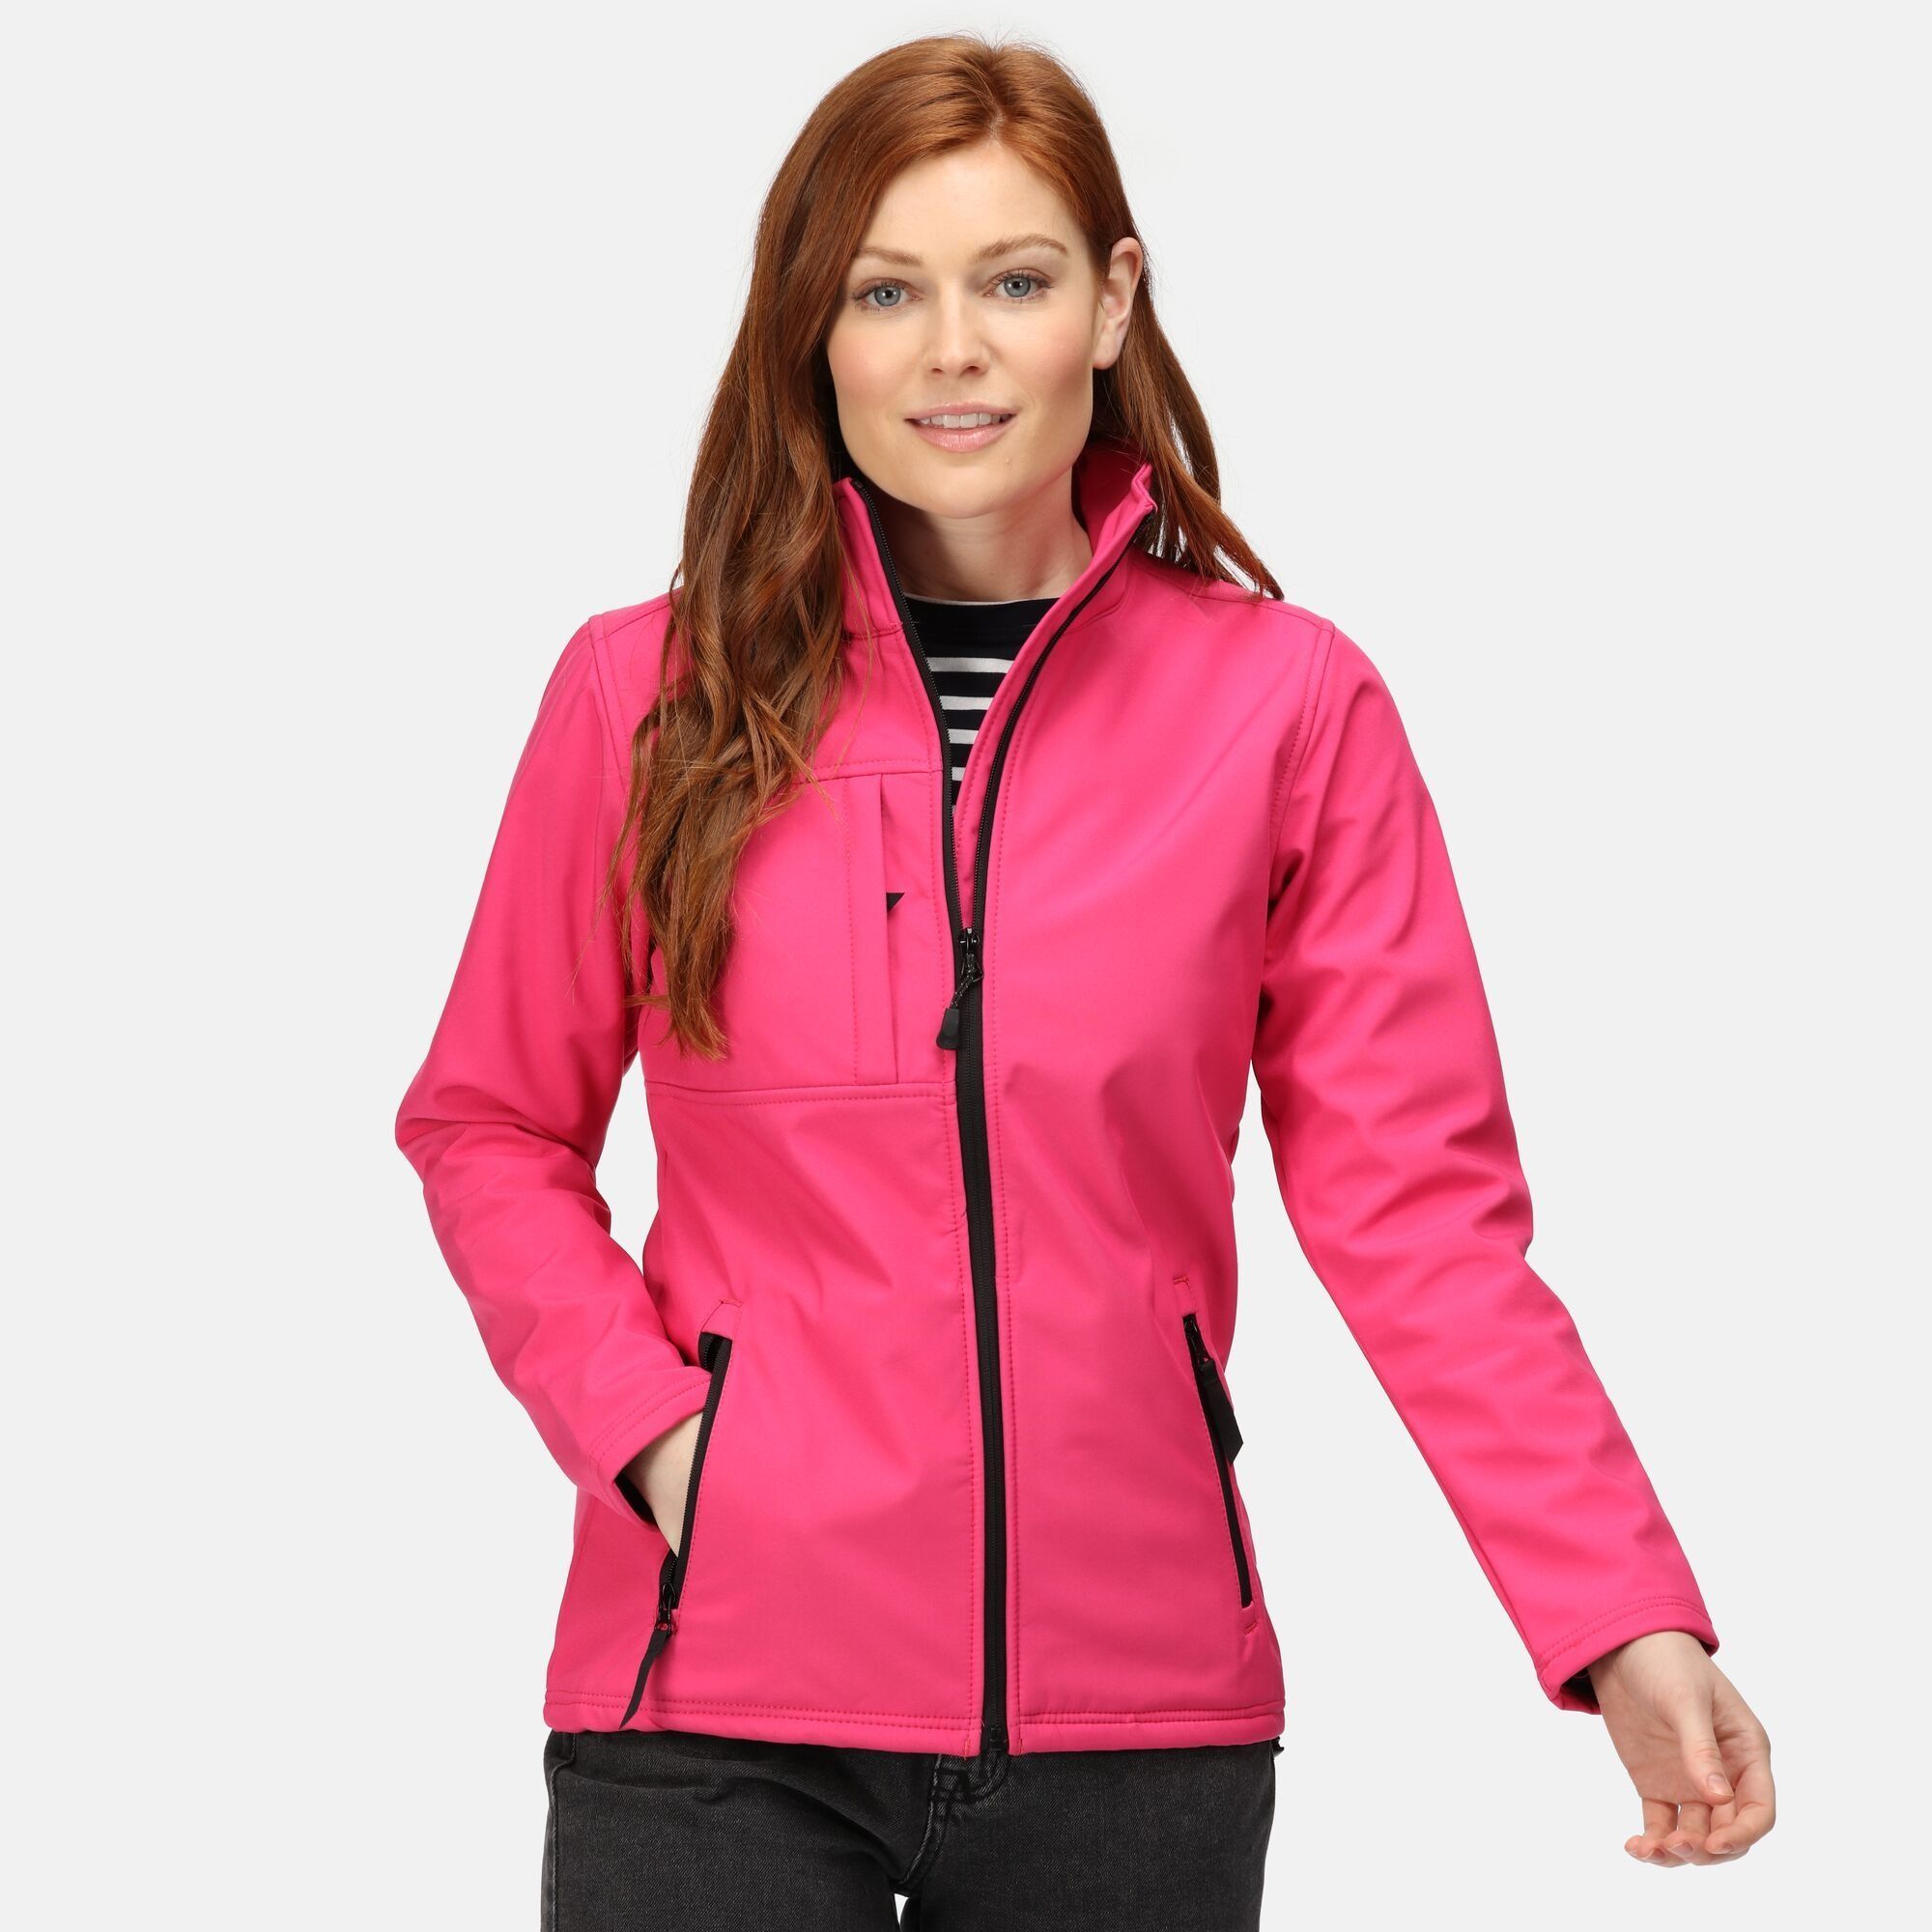 100% softshell. Waterproof and breathable build. Wind resistant membrane fabric. Inner zip guard. 2 zipped lower pockets and 1 chest pocket. Adjustable shockcord hem. Shaped fit. Regatta Womens sizing (bust approx): 6 (30in/76cm), 8 (32in/81cm), 10 (34in/86cm), 12 (36in/92cm), 14 (38in/97cm), 16 (40in/102cm), 18 (43in/109cm), 20 (45in/114cm), 22 (48in/122cm), 24 (50in/127cm), 26 (52in/132cm), 28 (54in/137cm), 30 (56in/142cm), 32 (58in/147cm), 34 (60in/152cm), 36 (62in/158cm).